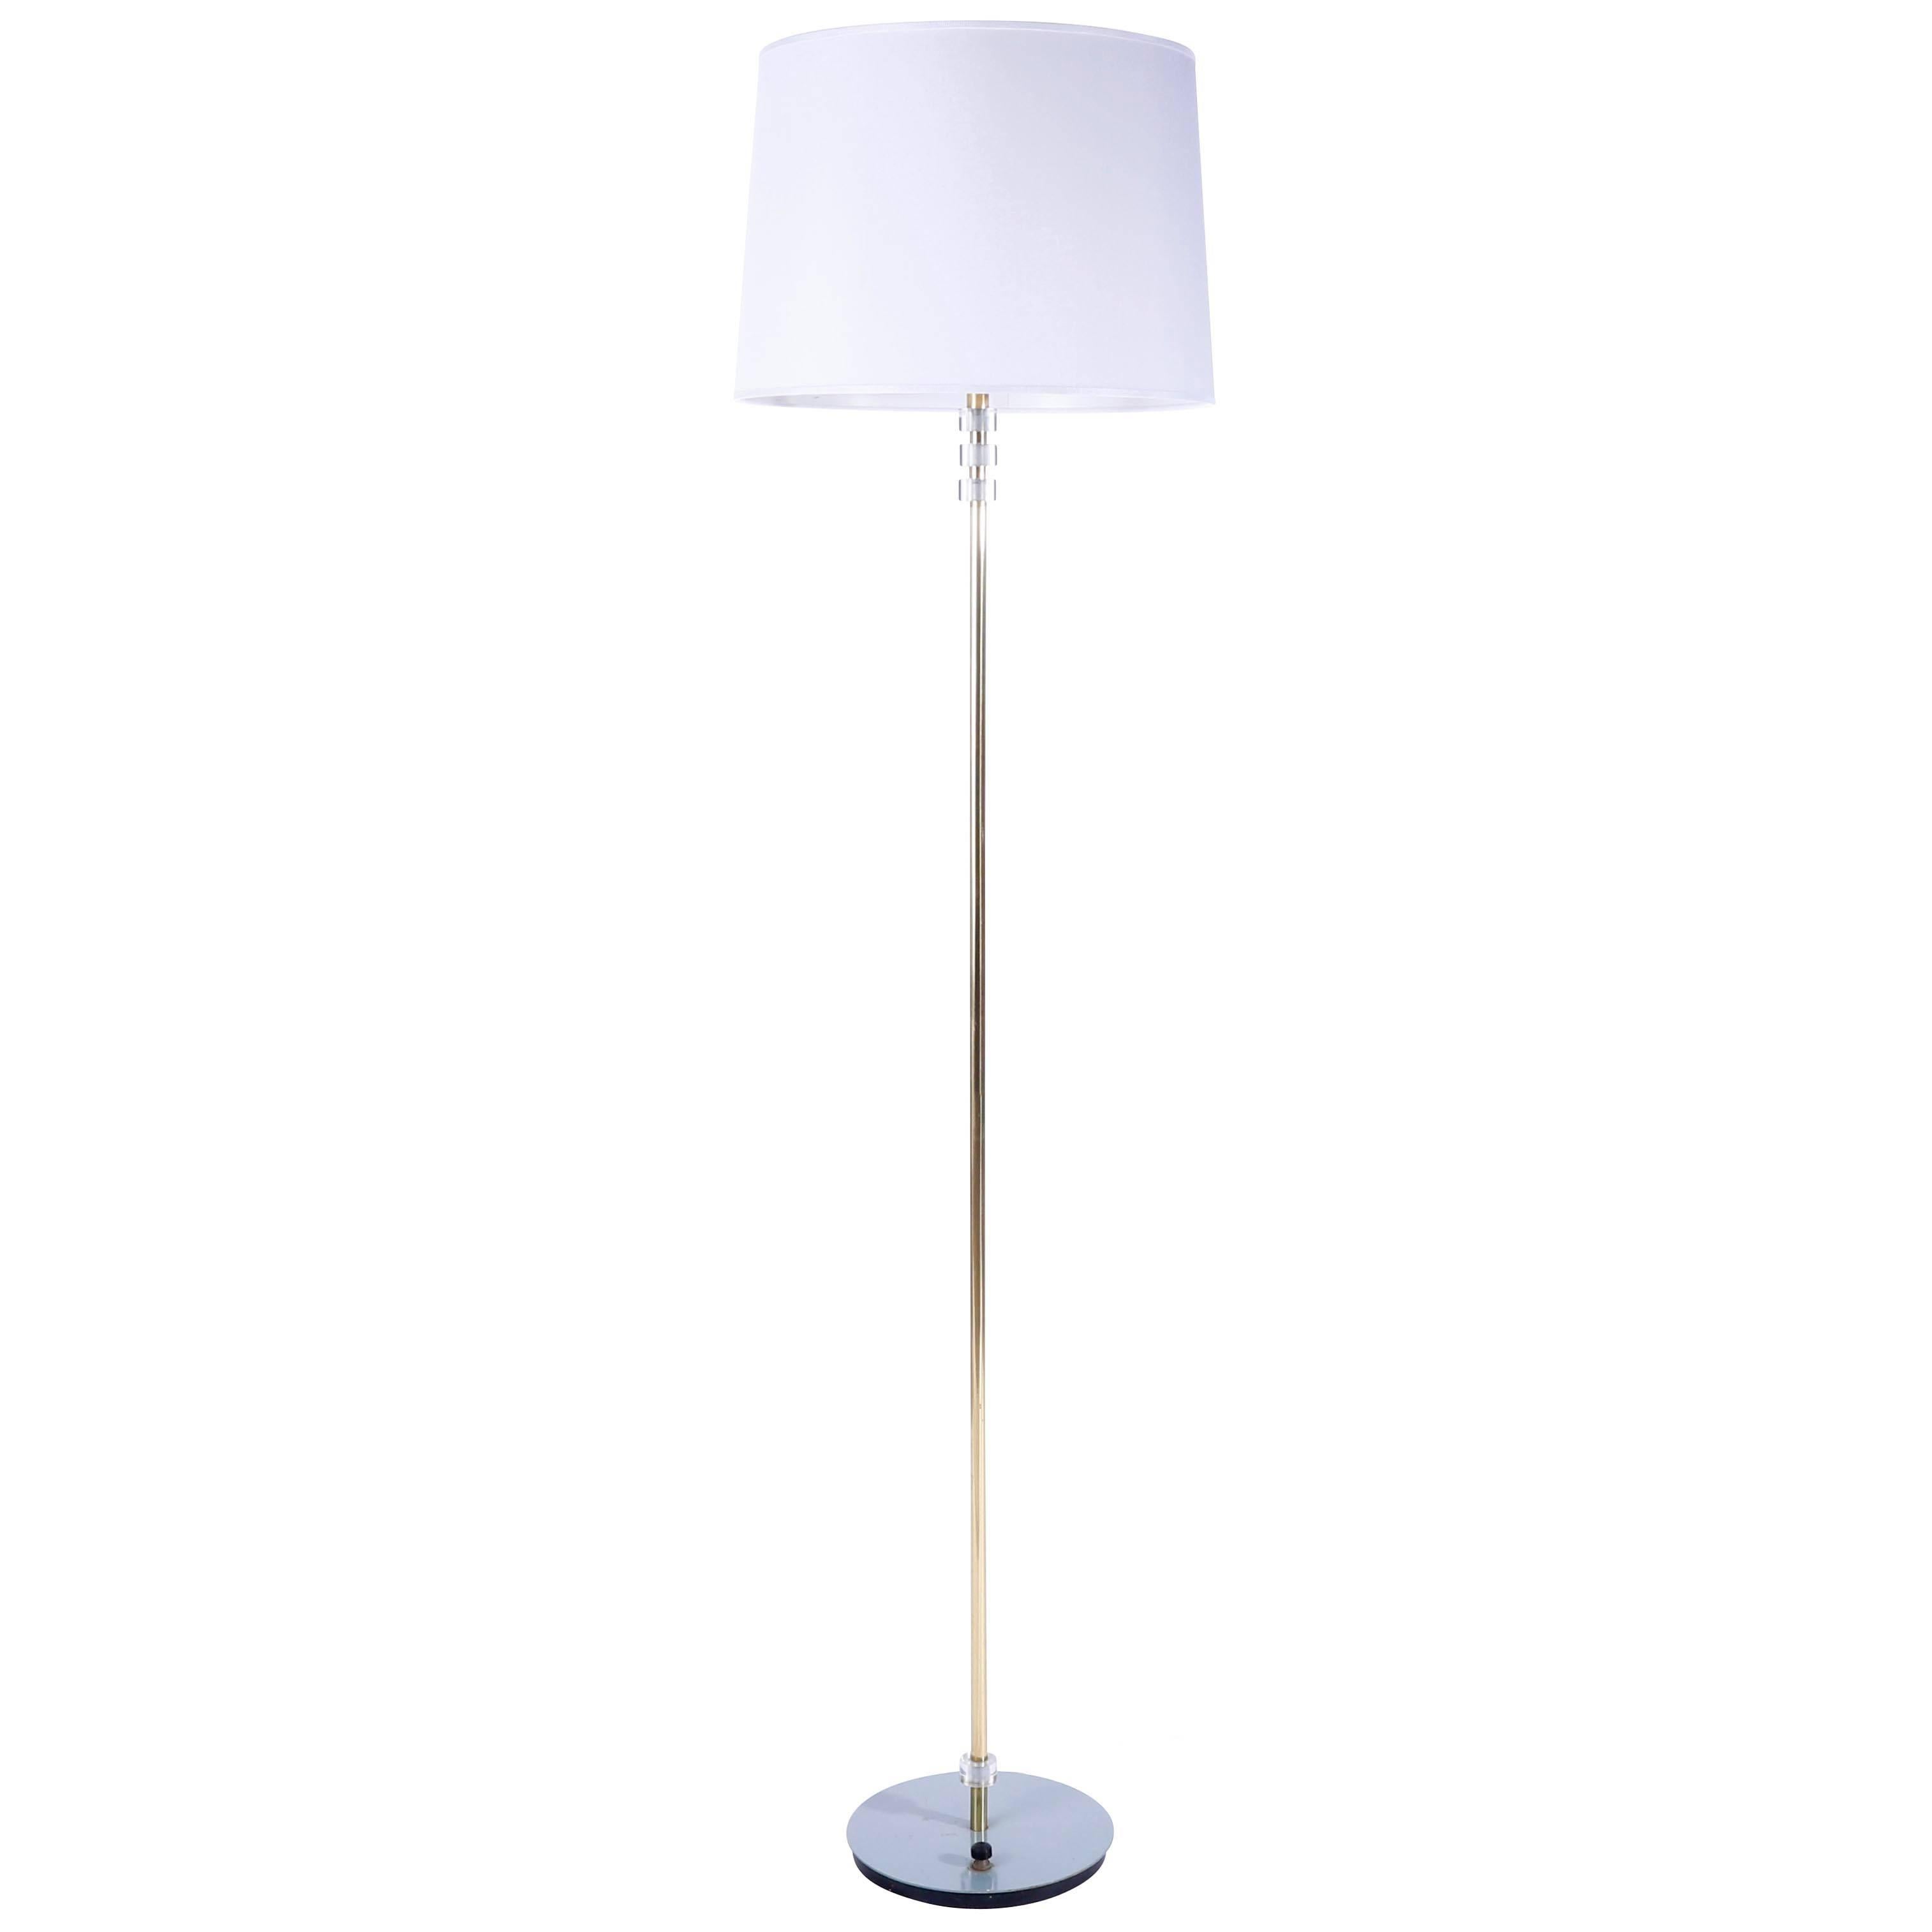 A brass floor lamp manufactured in midcentury, circa 1960 (late 1950s or early 1960s). 
The Stand is made of a brass rod and Lucite discs. The turquoise painted base has an integrated switch.
The light has two sockets for medium screw base LEDs or